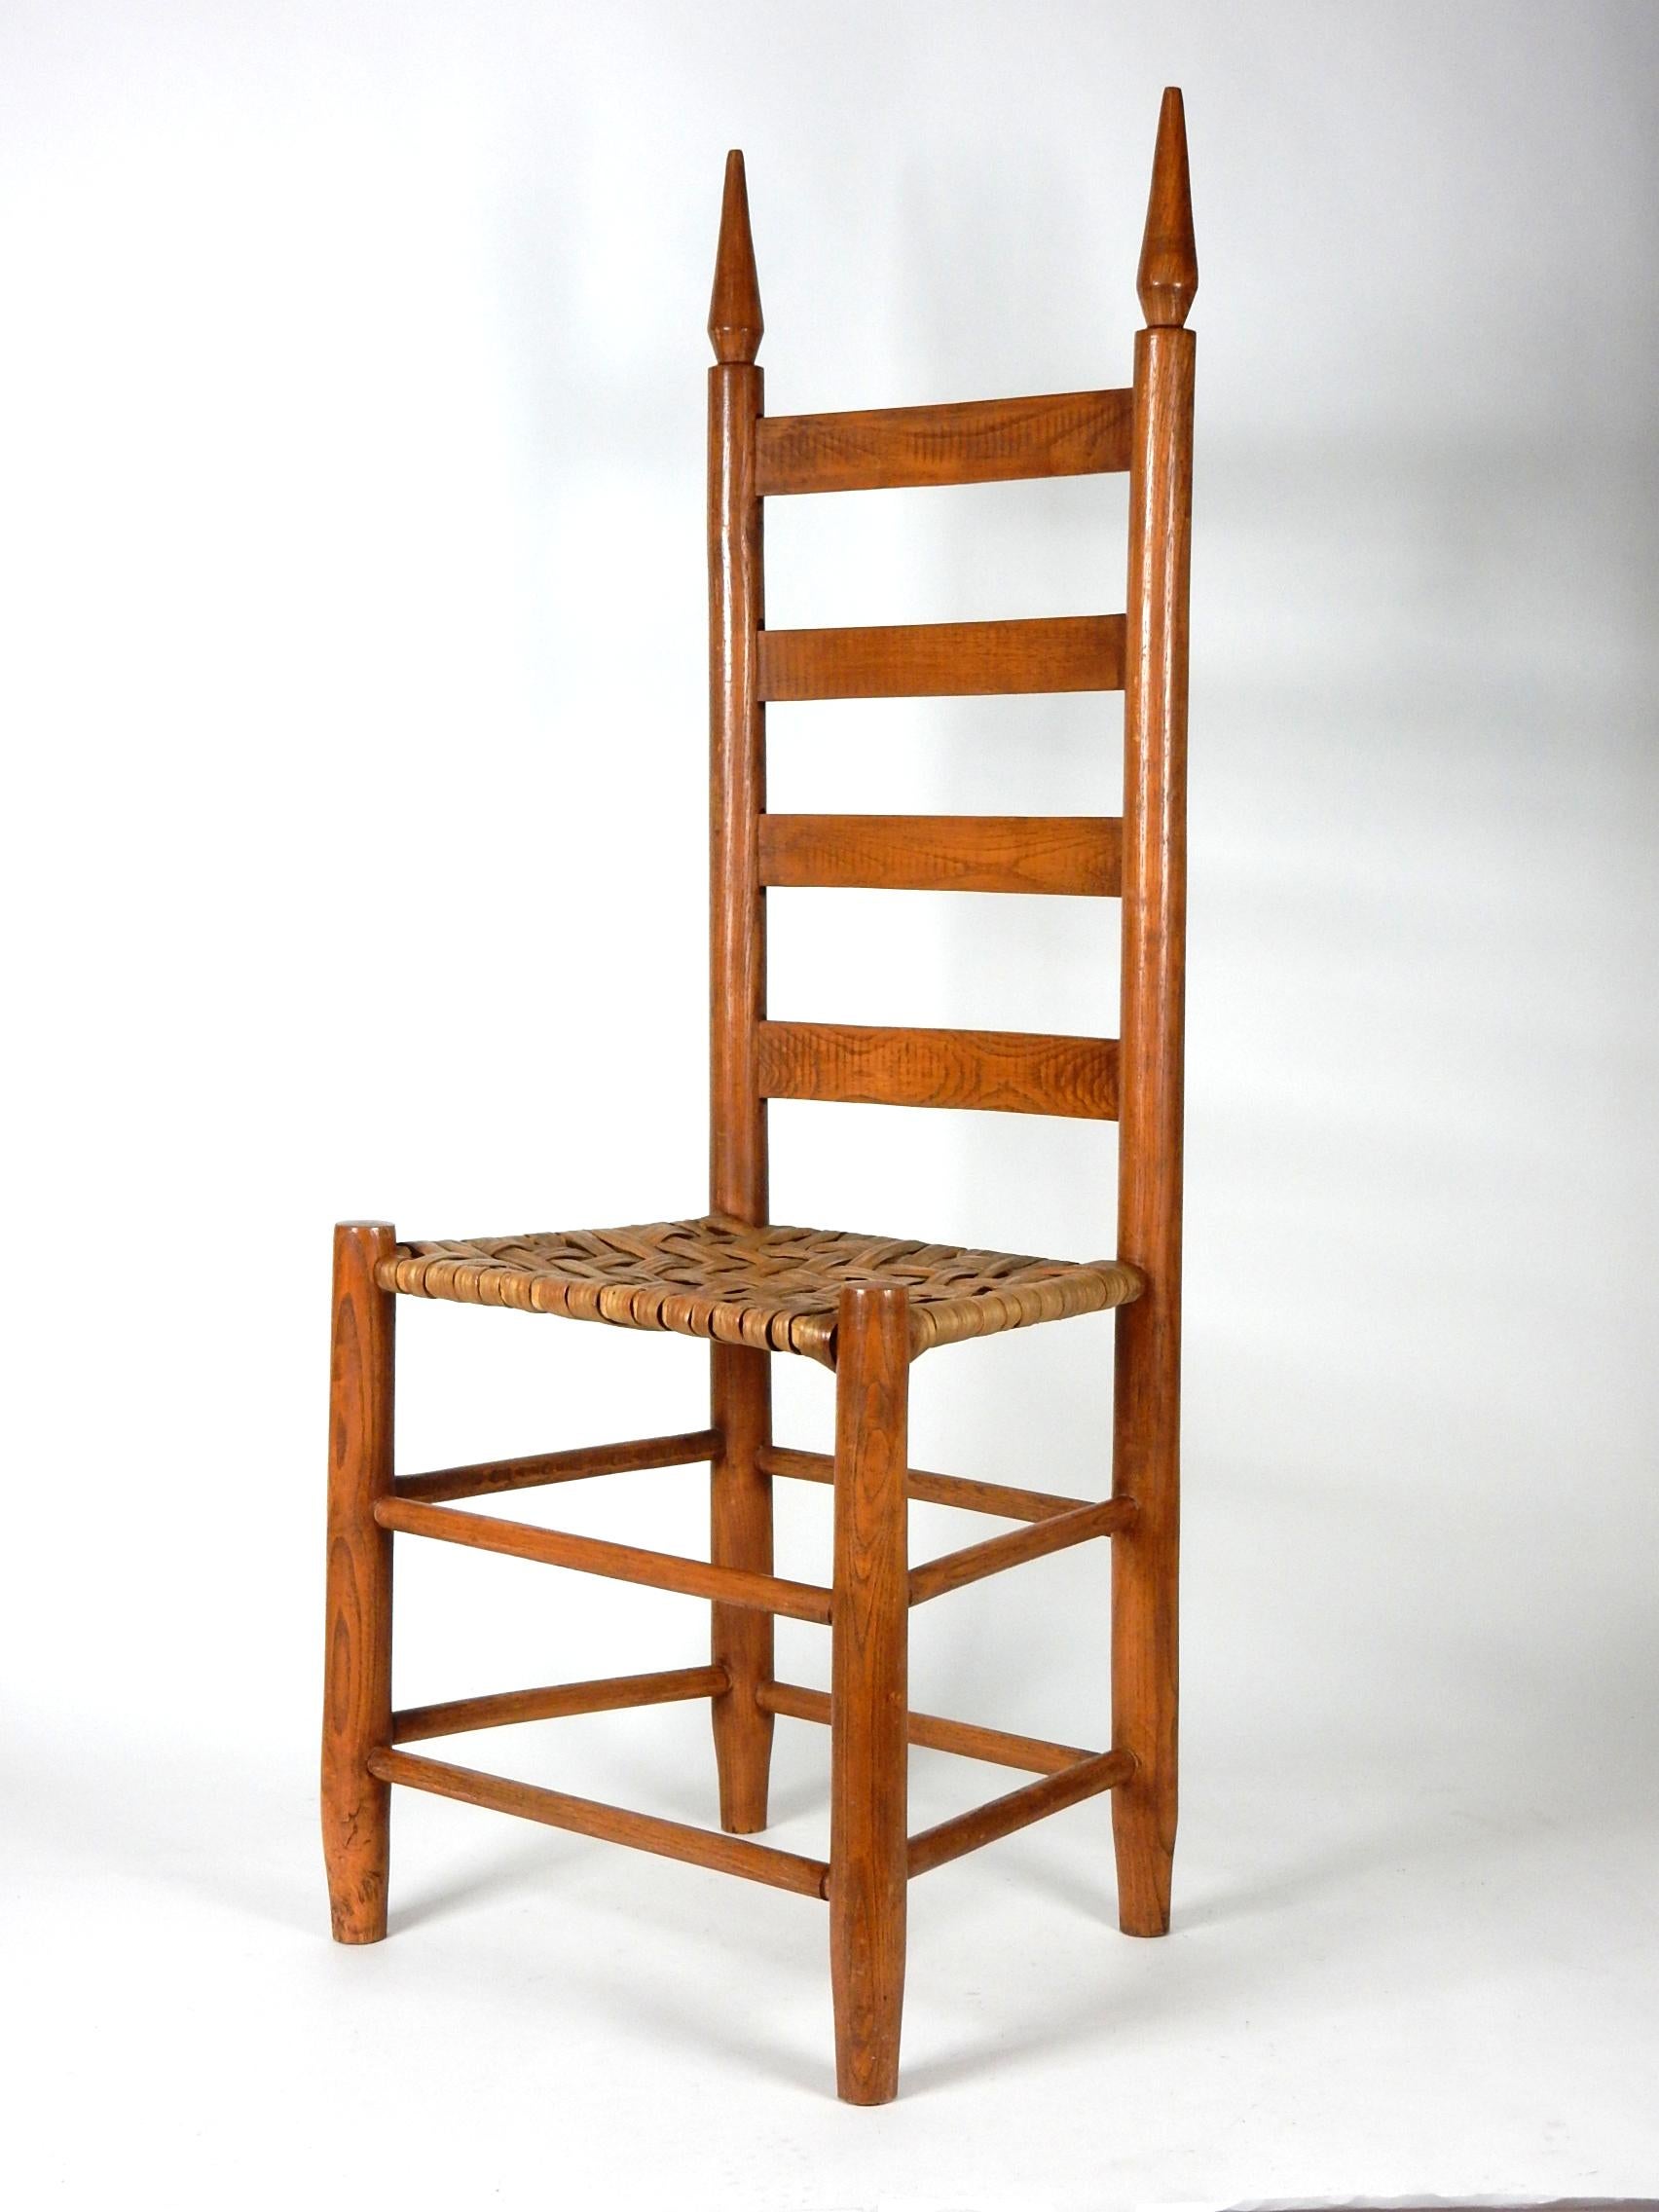 shaker style chair